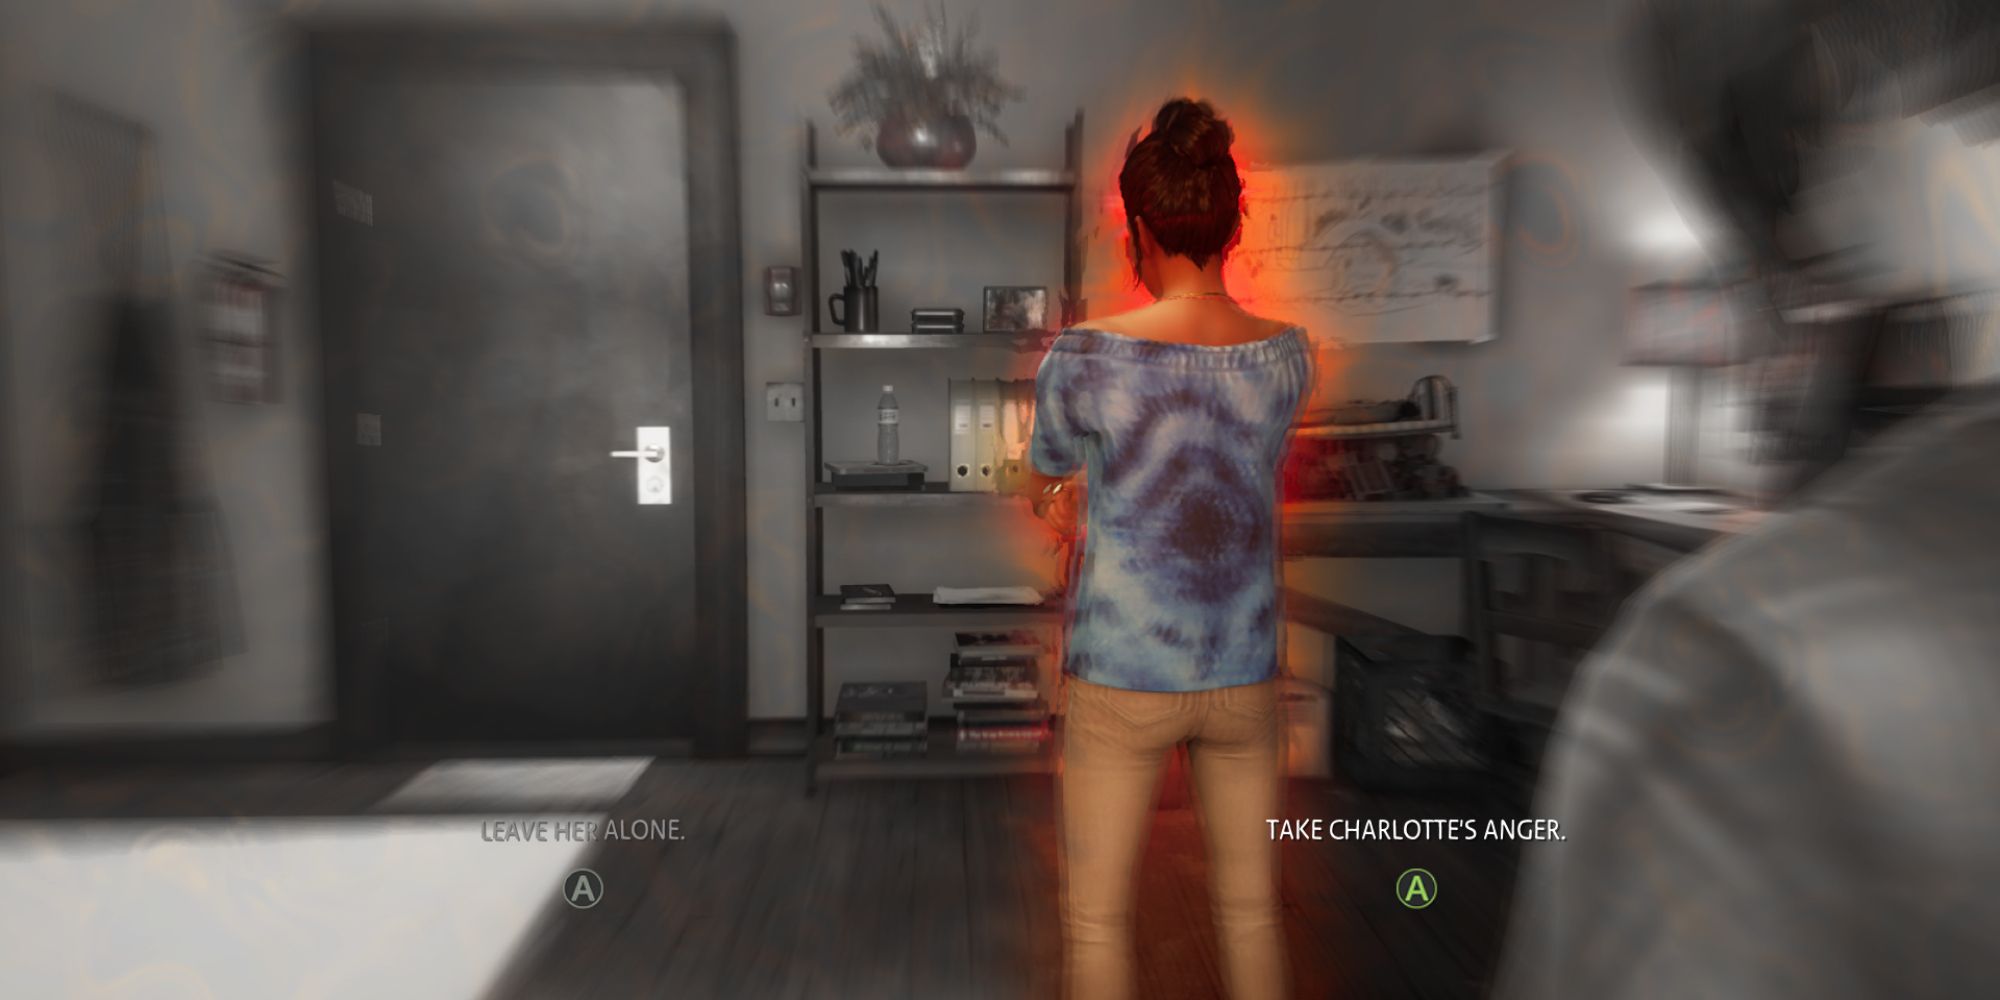 Life is Strange True Colors Screenshot Of Deciding Whether To Take Charlotte's Anger